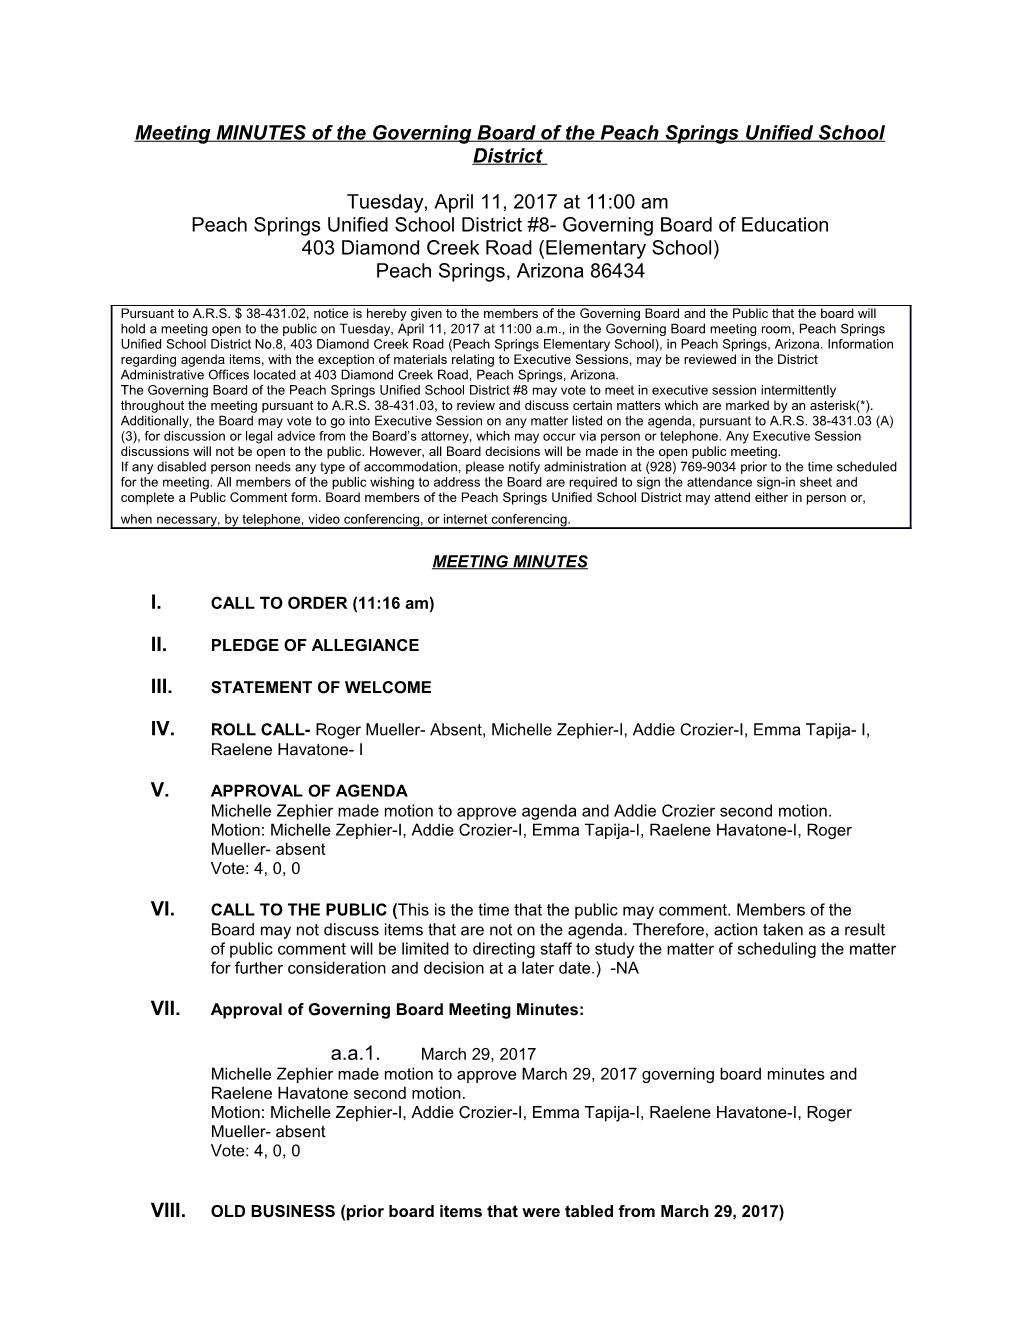 Meeting MINUTES of the Governing Board of the Peach Springs Unified School District